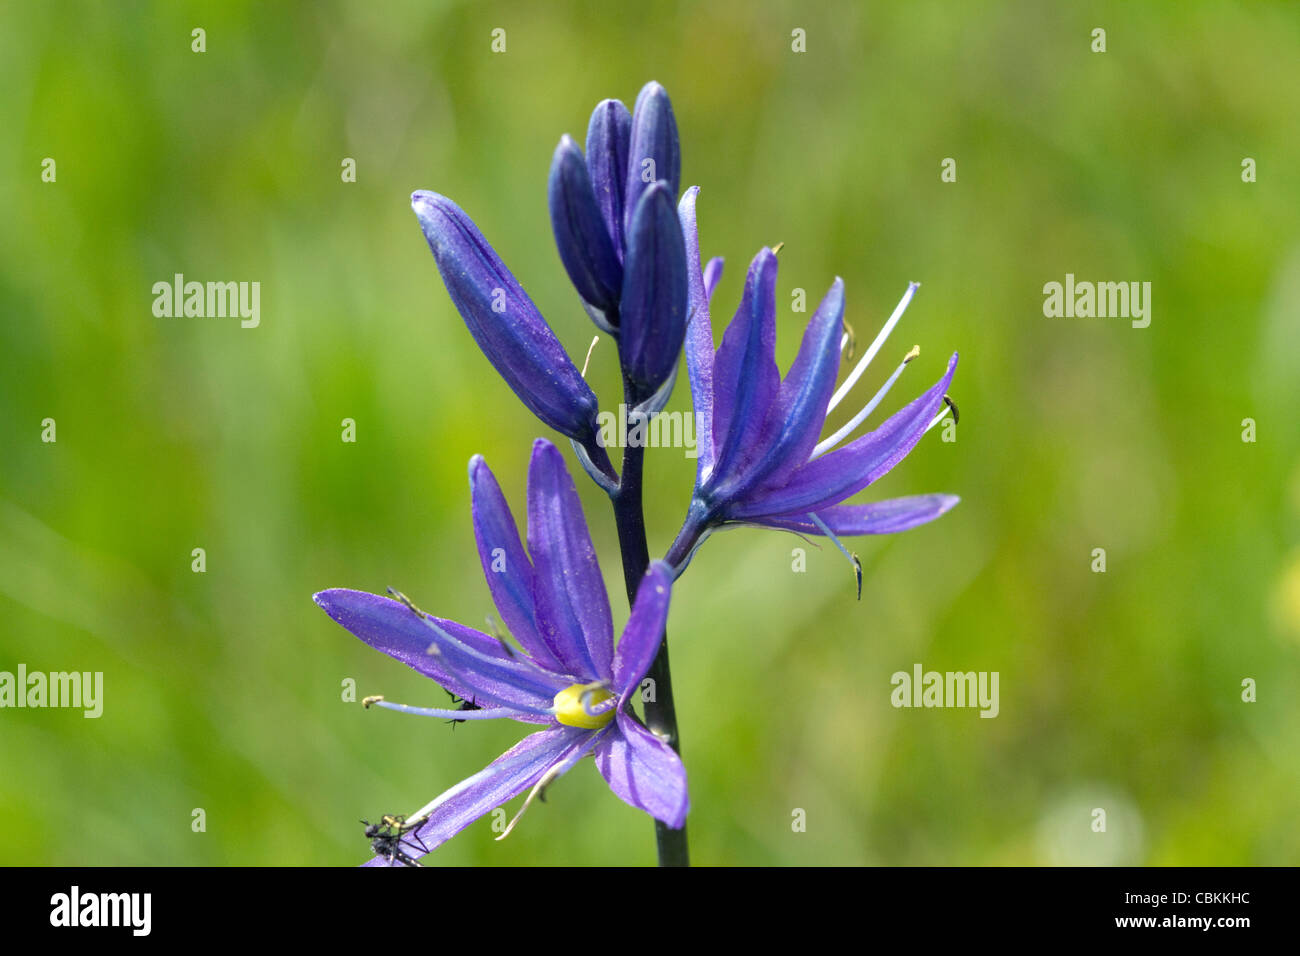 Camassia quamash, also known as Small Camas flowering perennial herb. Stock Photo